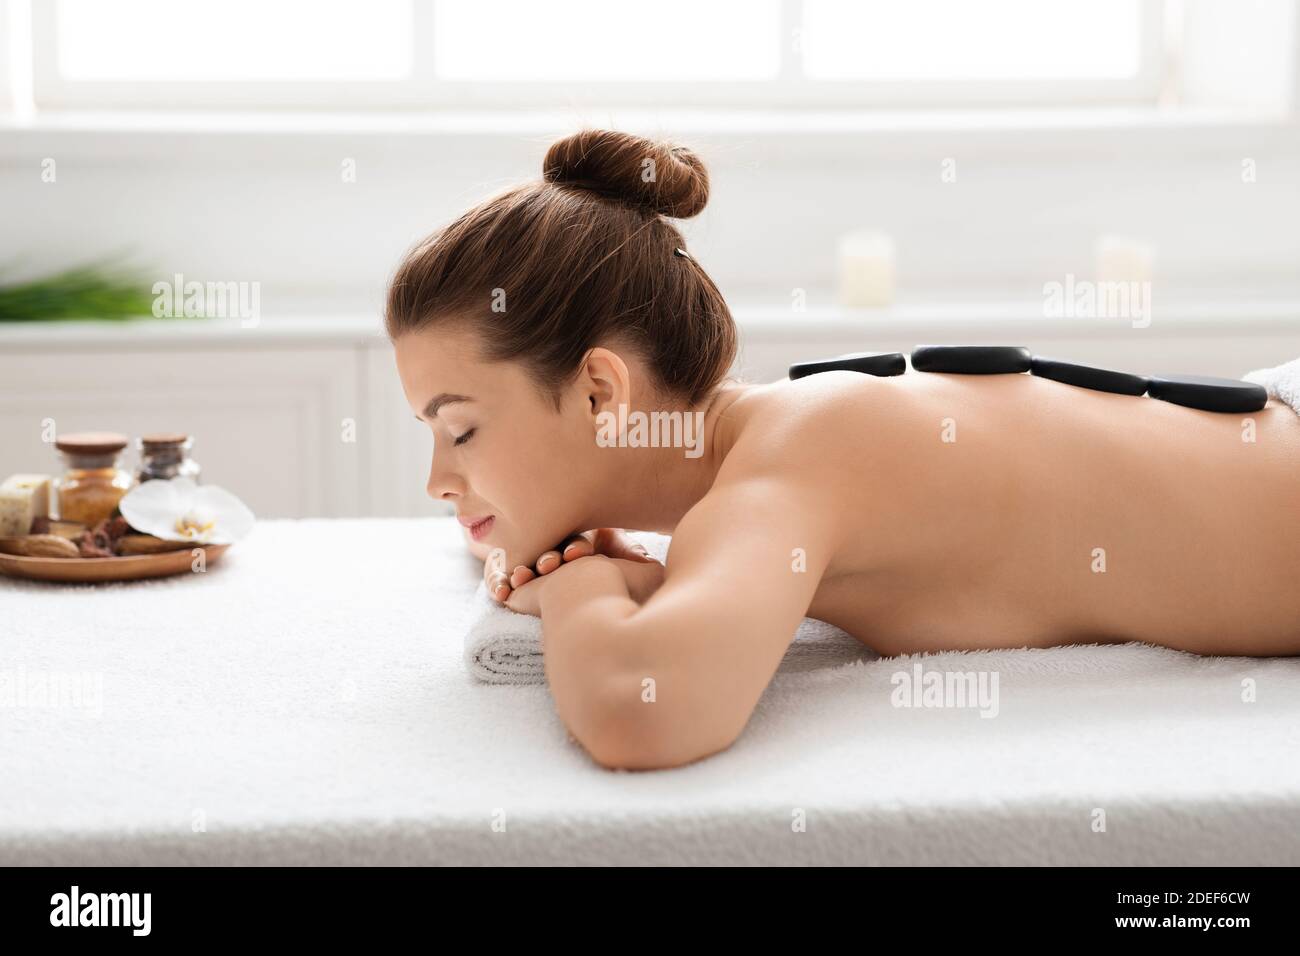 Side view of young lady getting hot stone massage Stock Photo